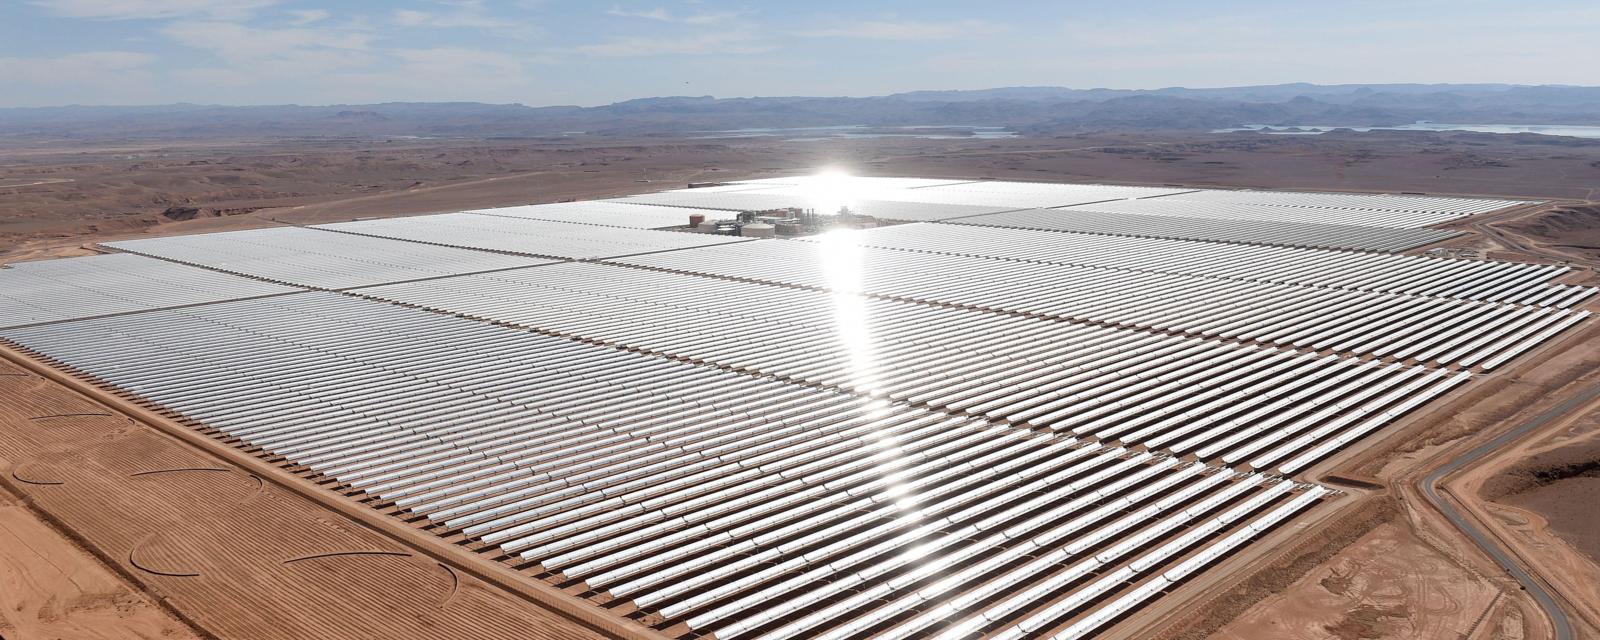 The colossal African solar farm that has been built in Morocco.